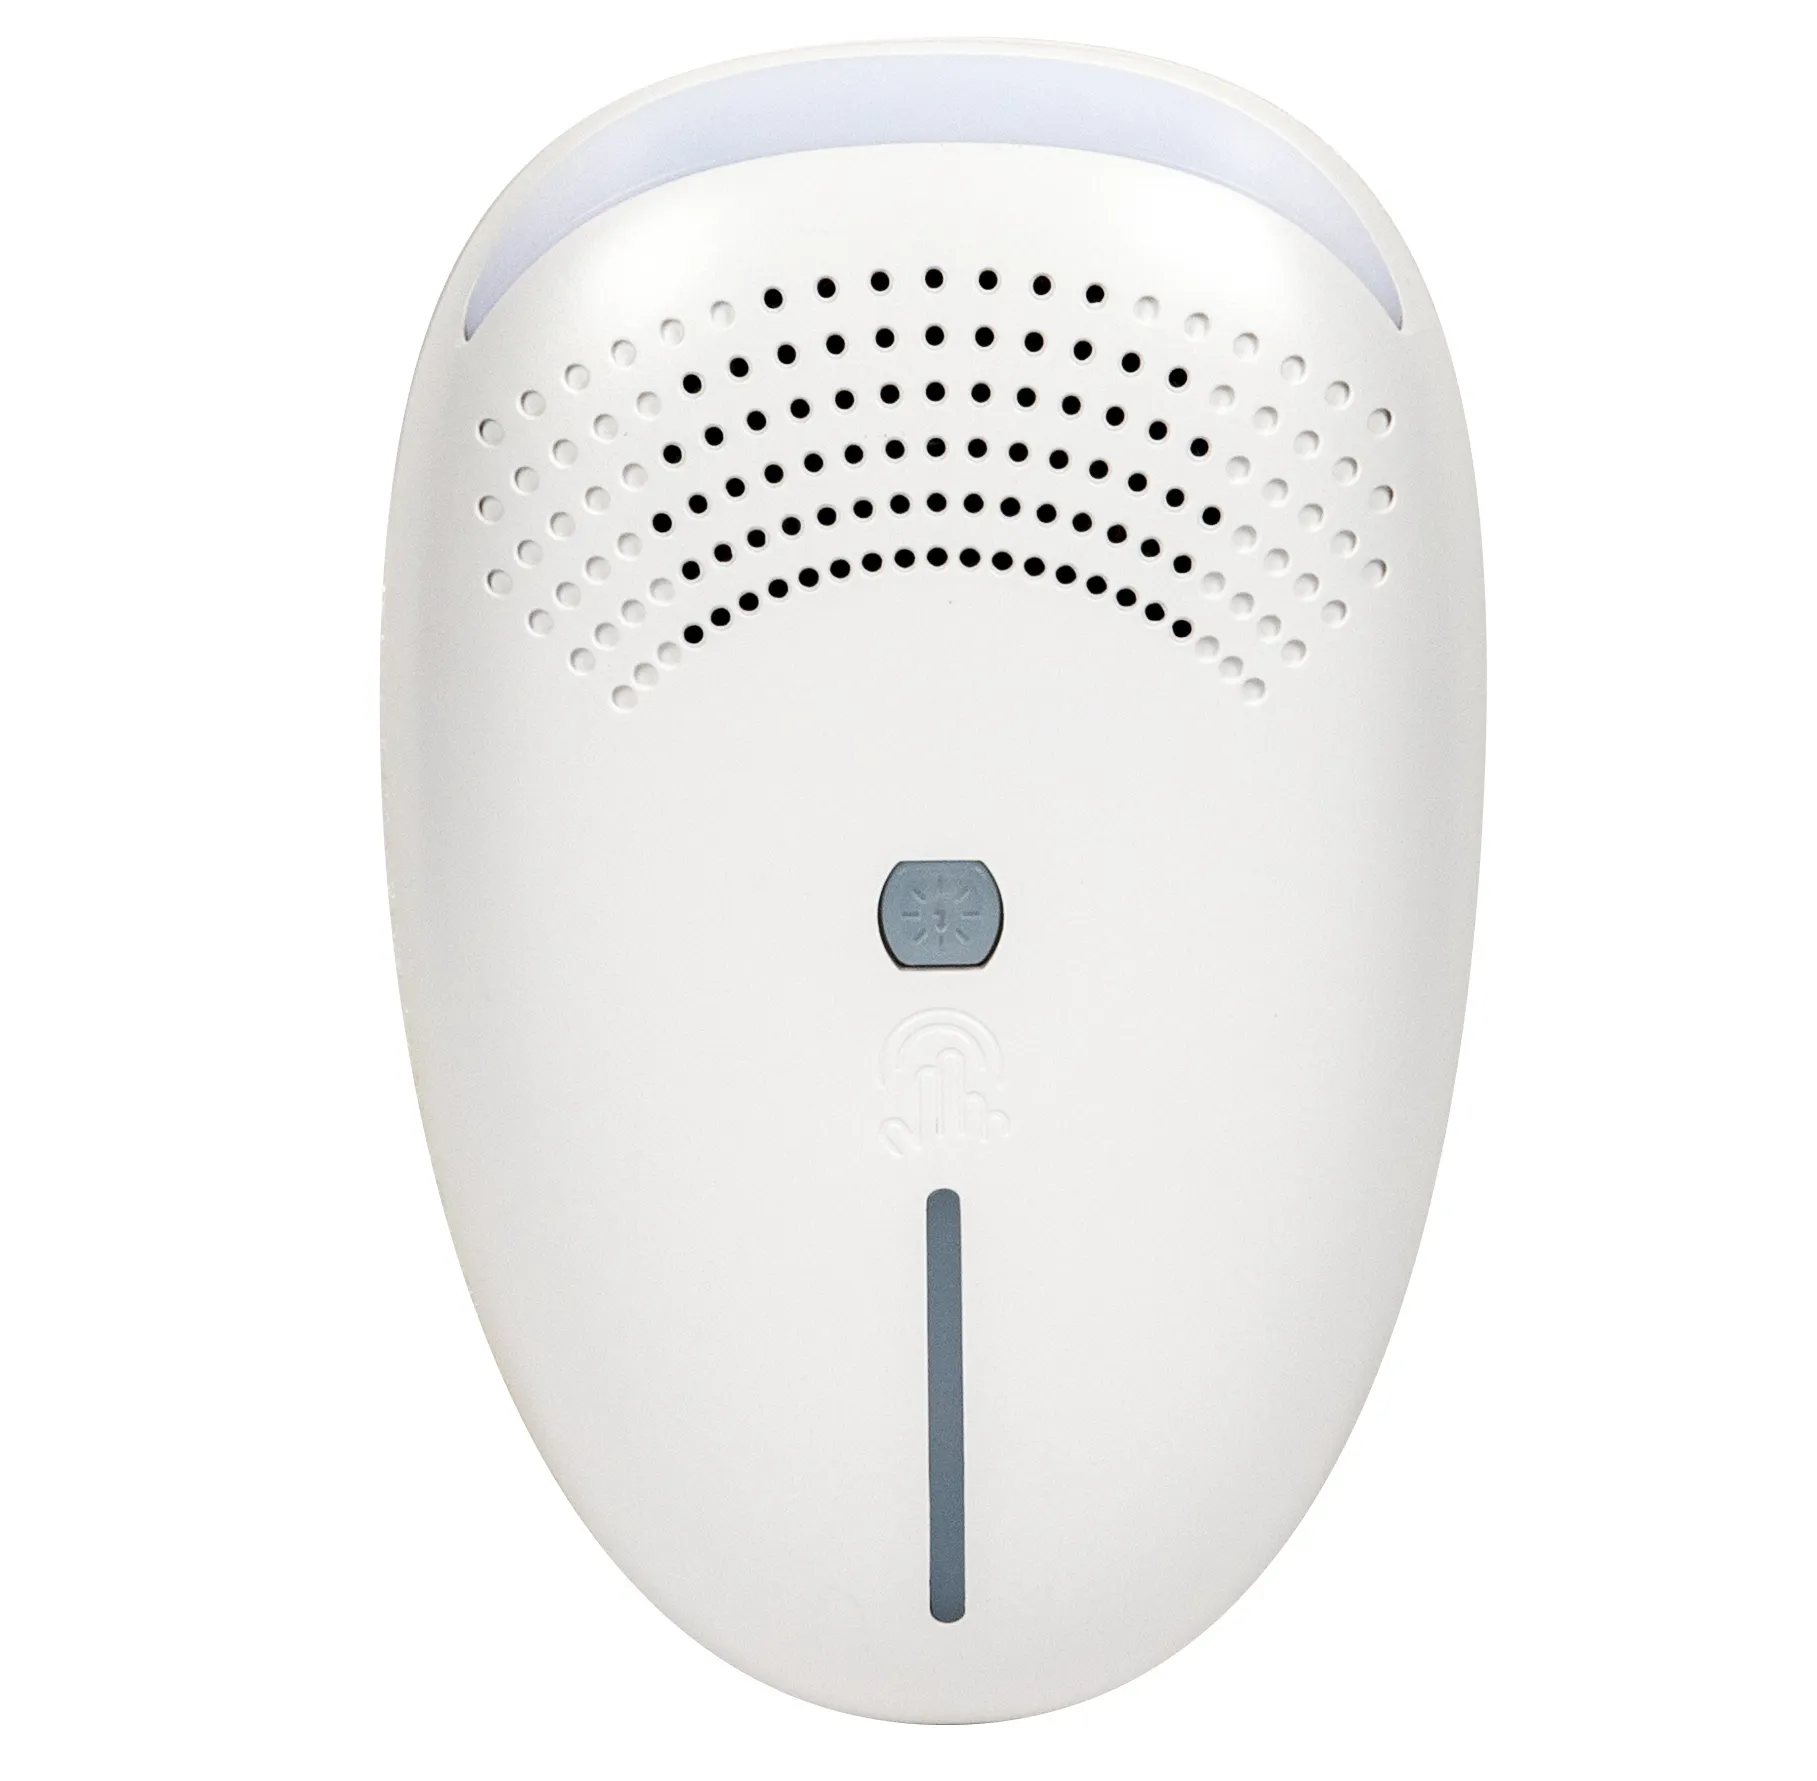 Ultrasonic Pest Repeller Plug in Pest Repellent Rodent Electromagnetic Indoor Electrical Insect Spiders Mice Rat Roach Control